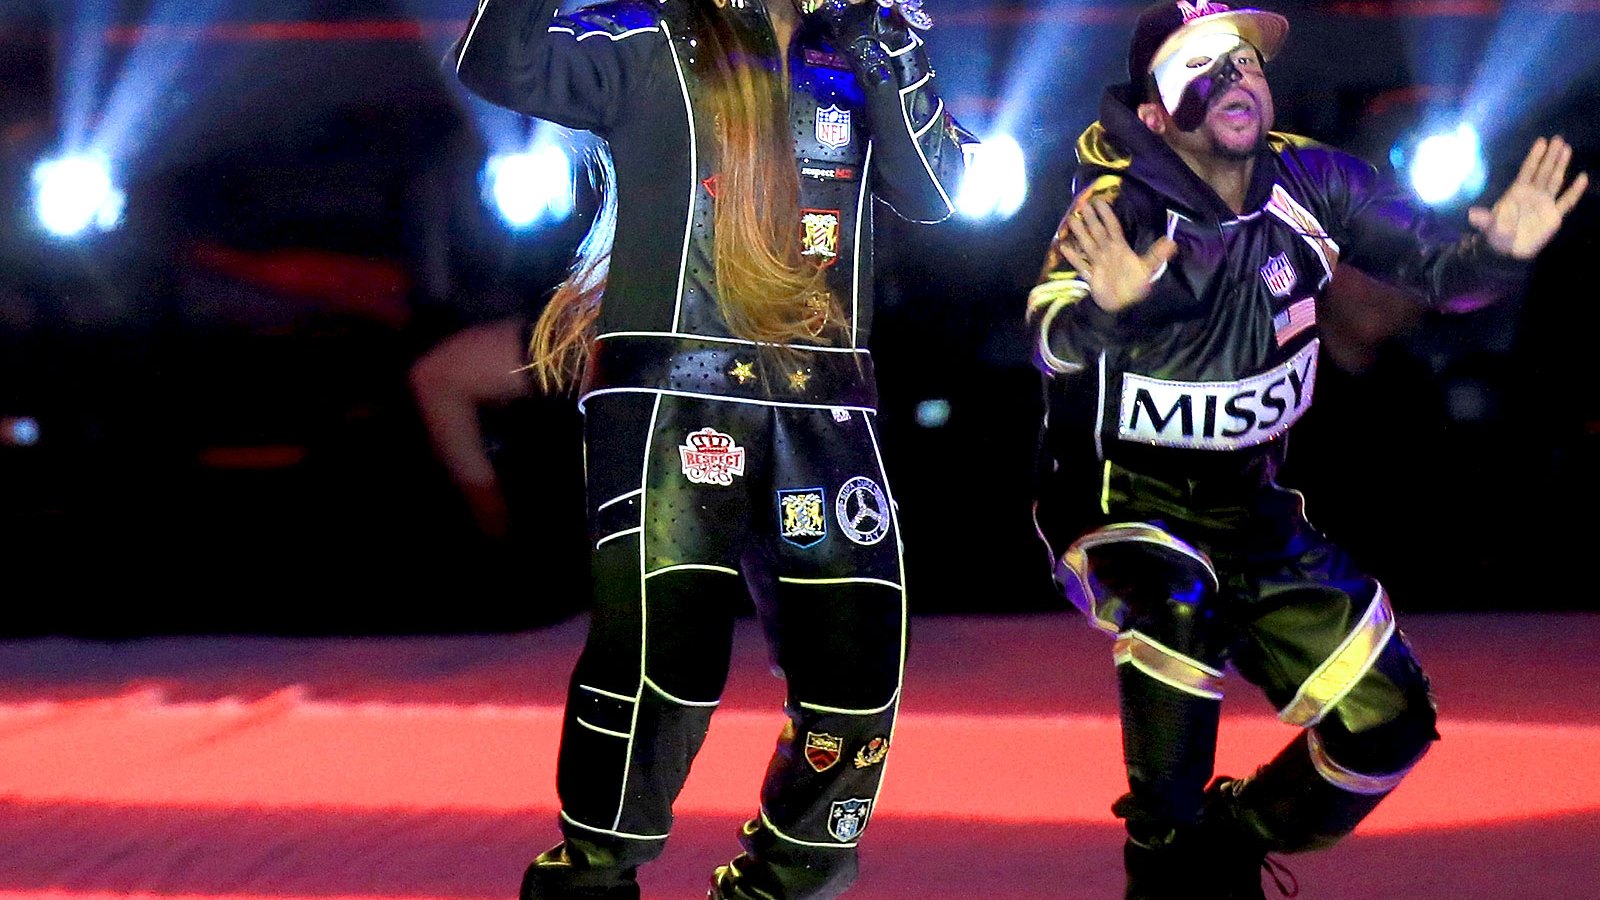 Missy Eliot performs onstage during the Super Bowl XLIX Halftime Show